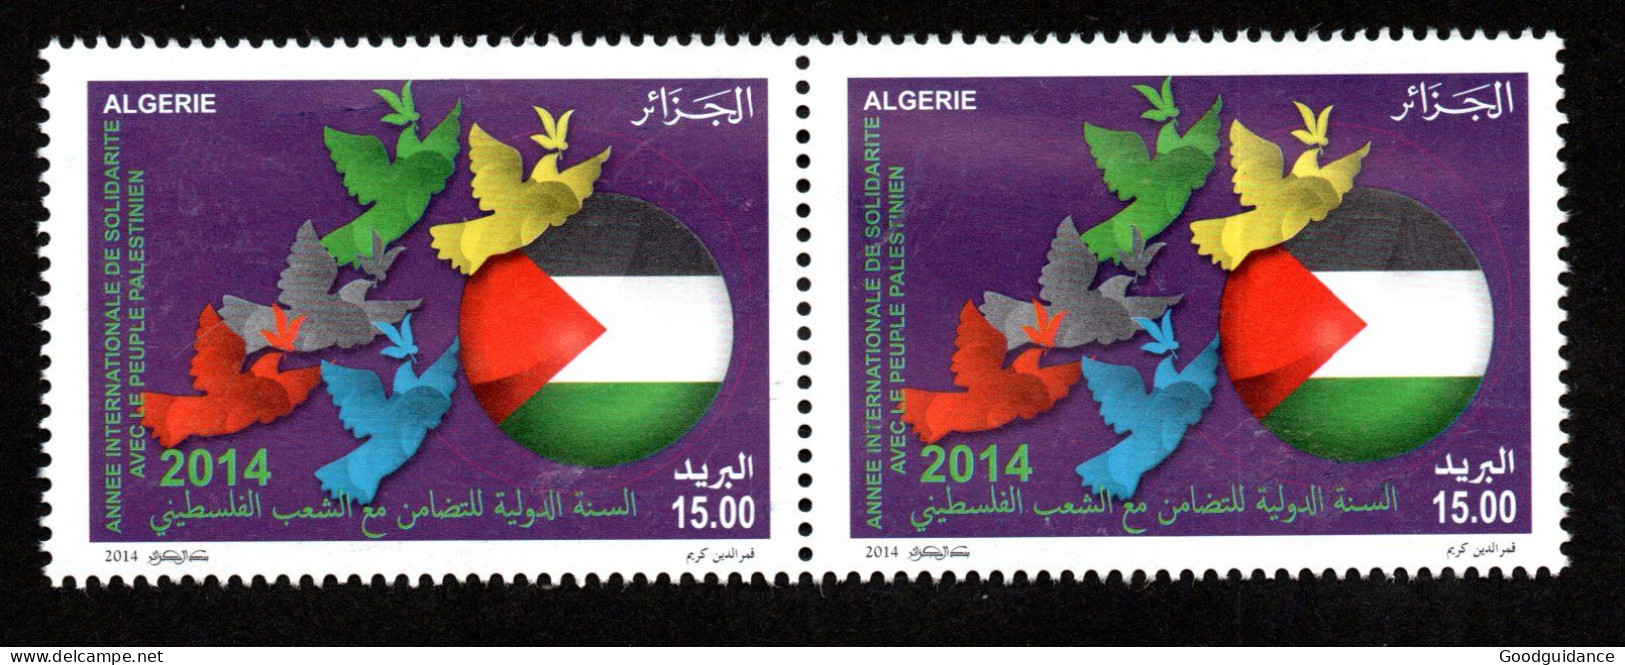 2014- Algeria- International Year Of Solidarity With The Palestinian People - Flag - Dove - Pair - Complete Set 1v.MNH** - Palestina